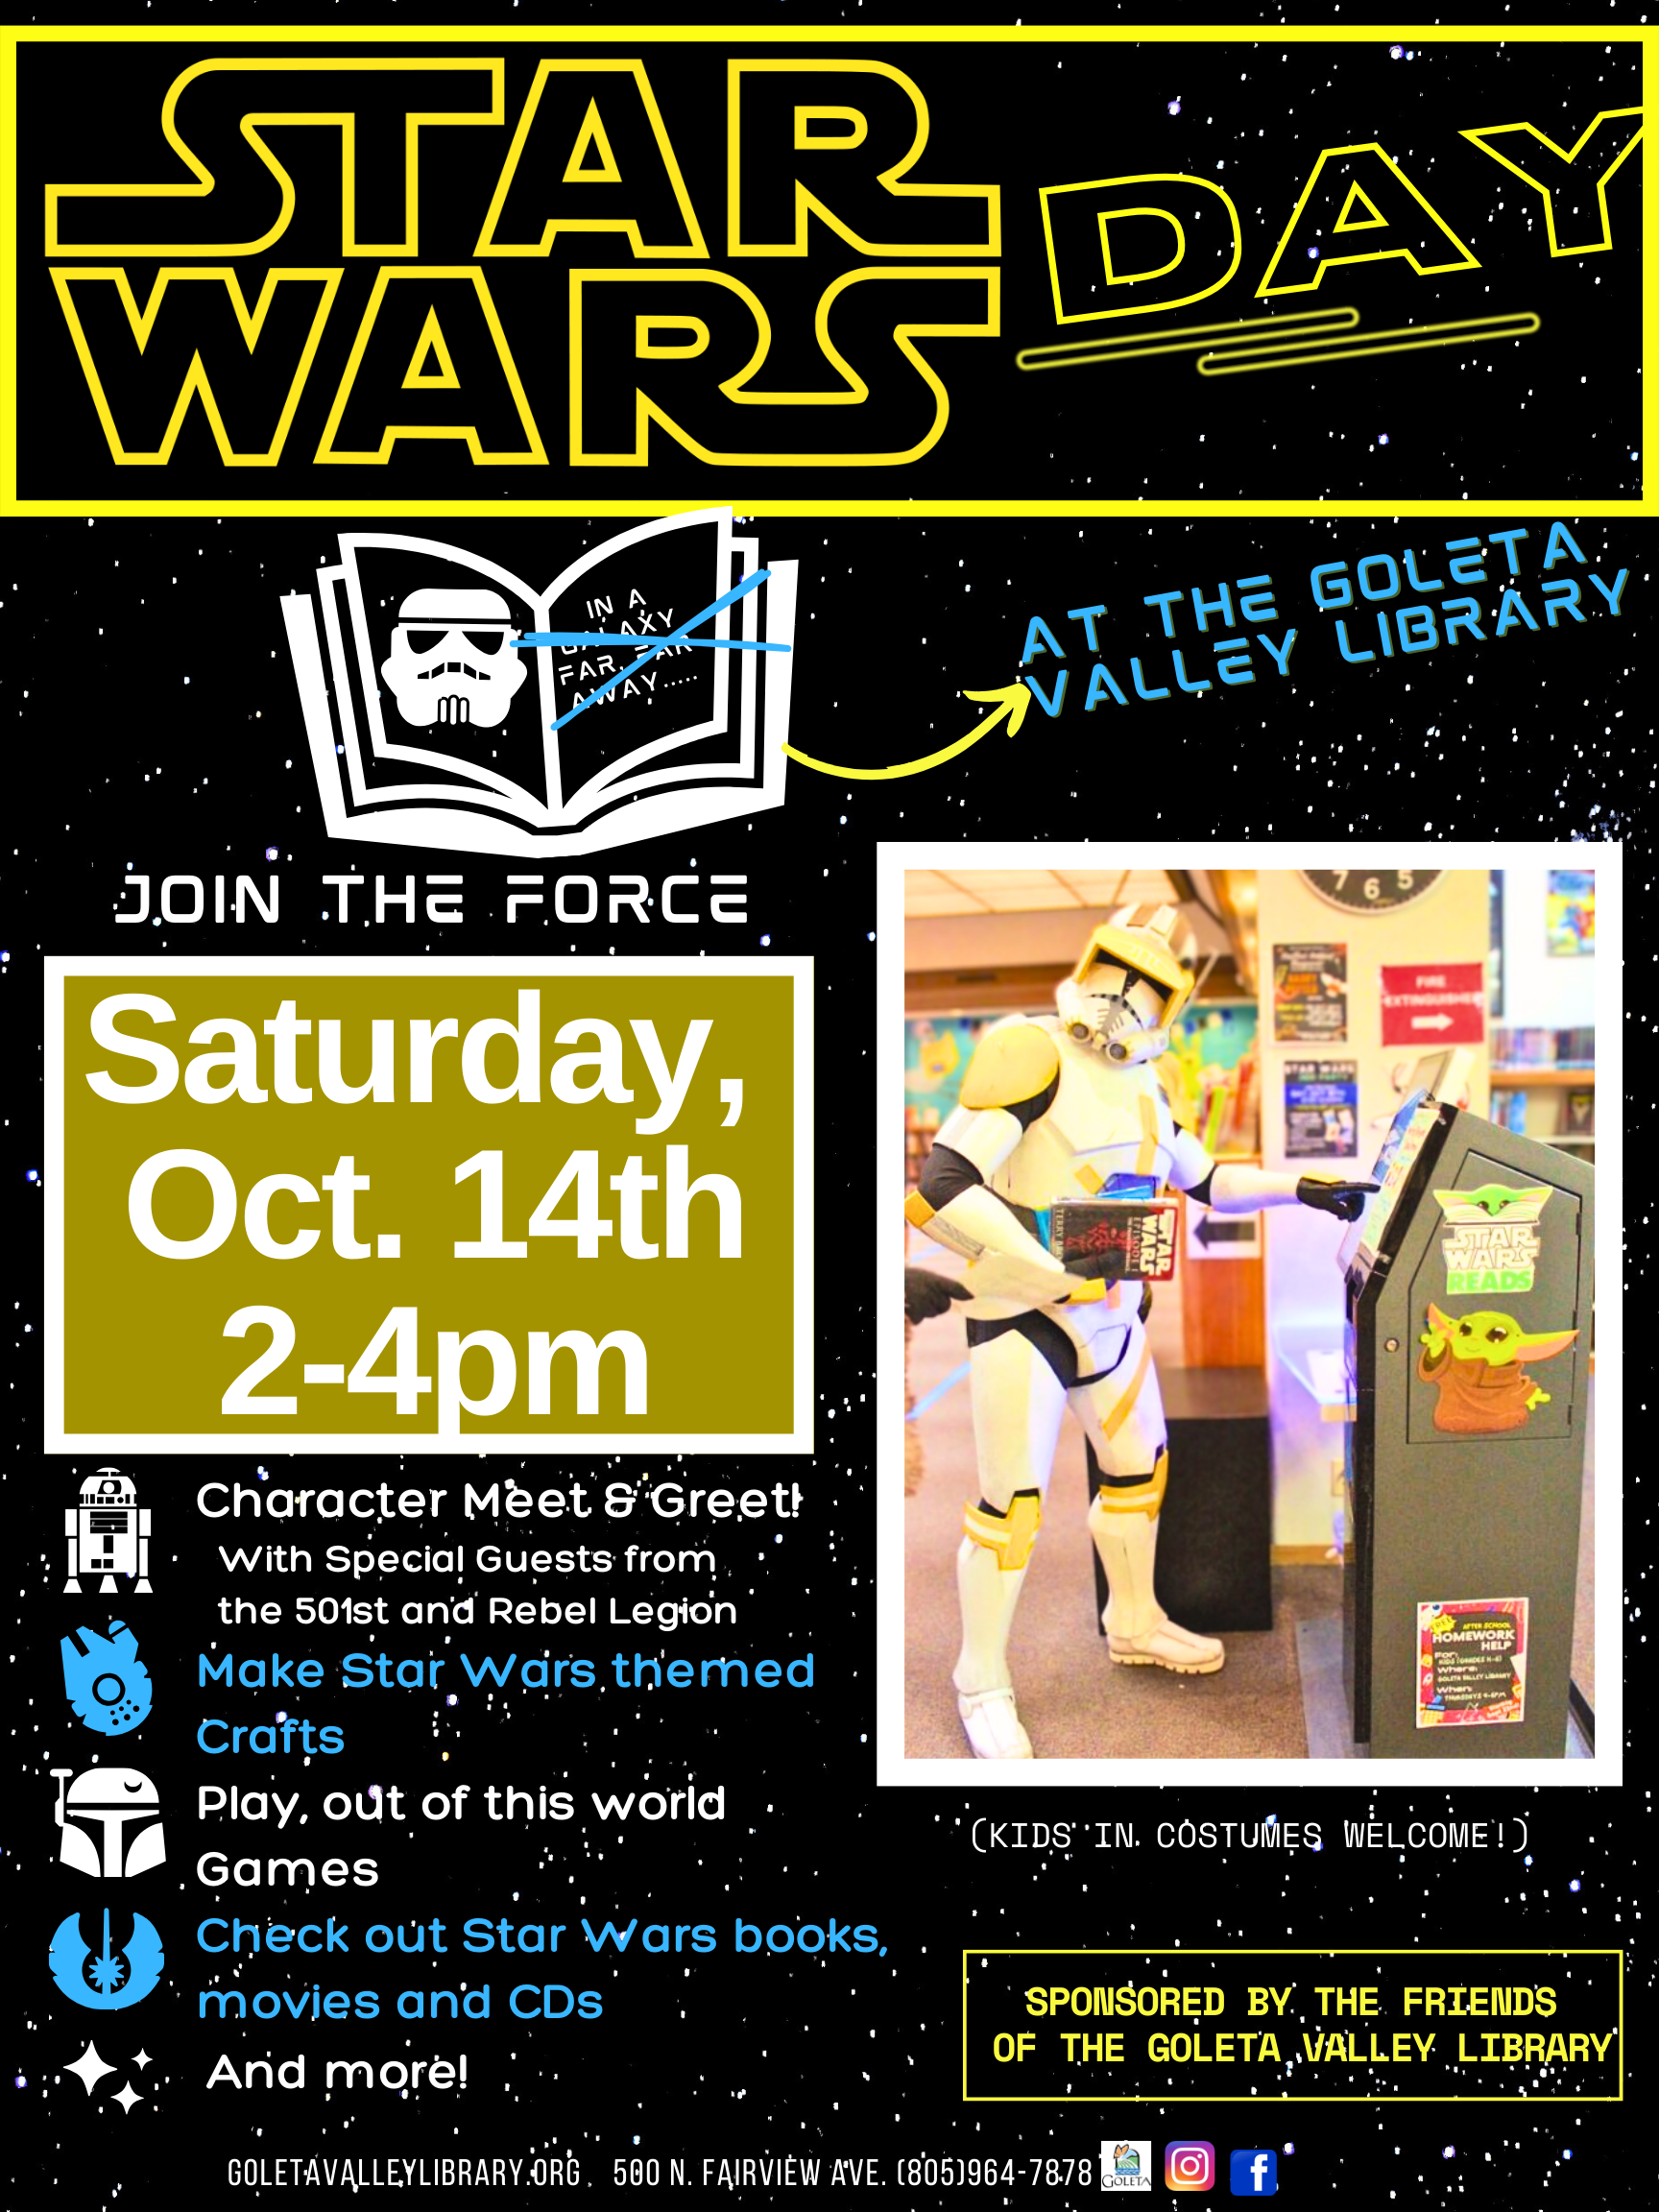 Star Wars Day Returns at the Goleta Valley Library - The Santa